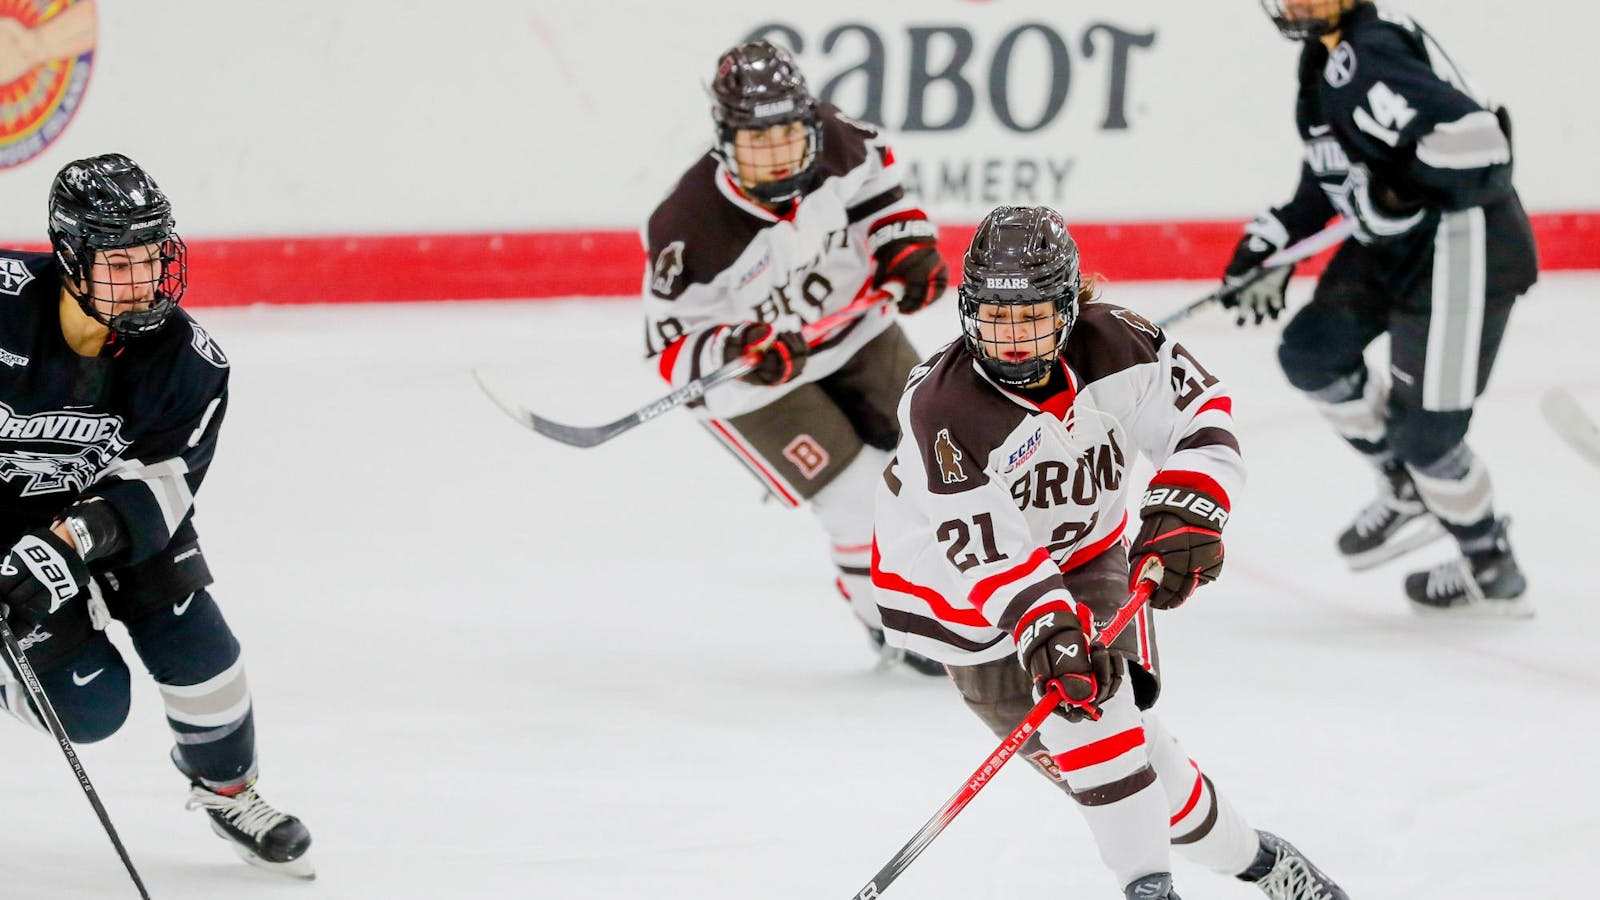 Women’s hockey falls to Providence College in Mayor’s Cup loss